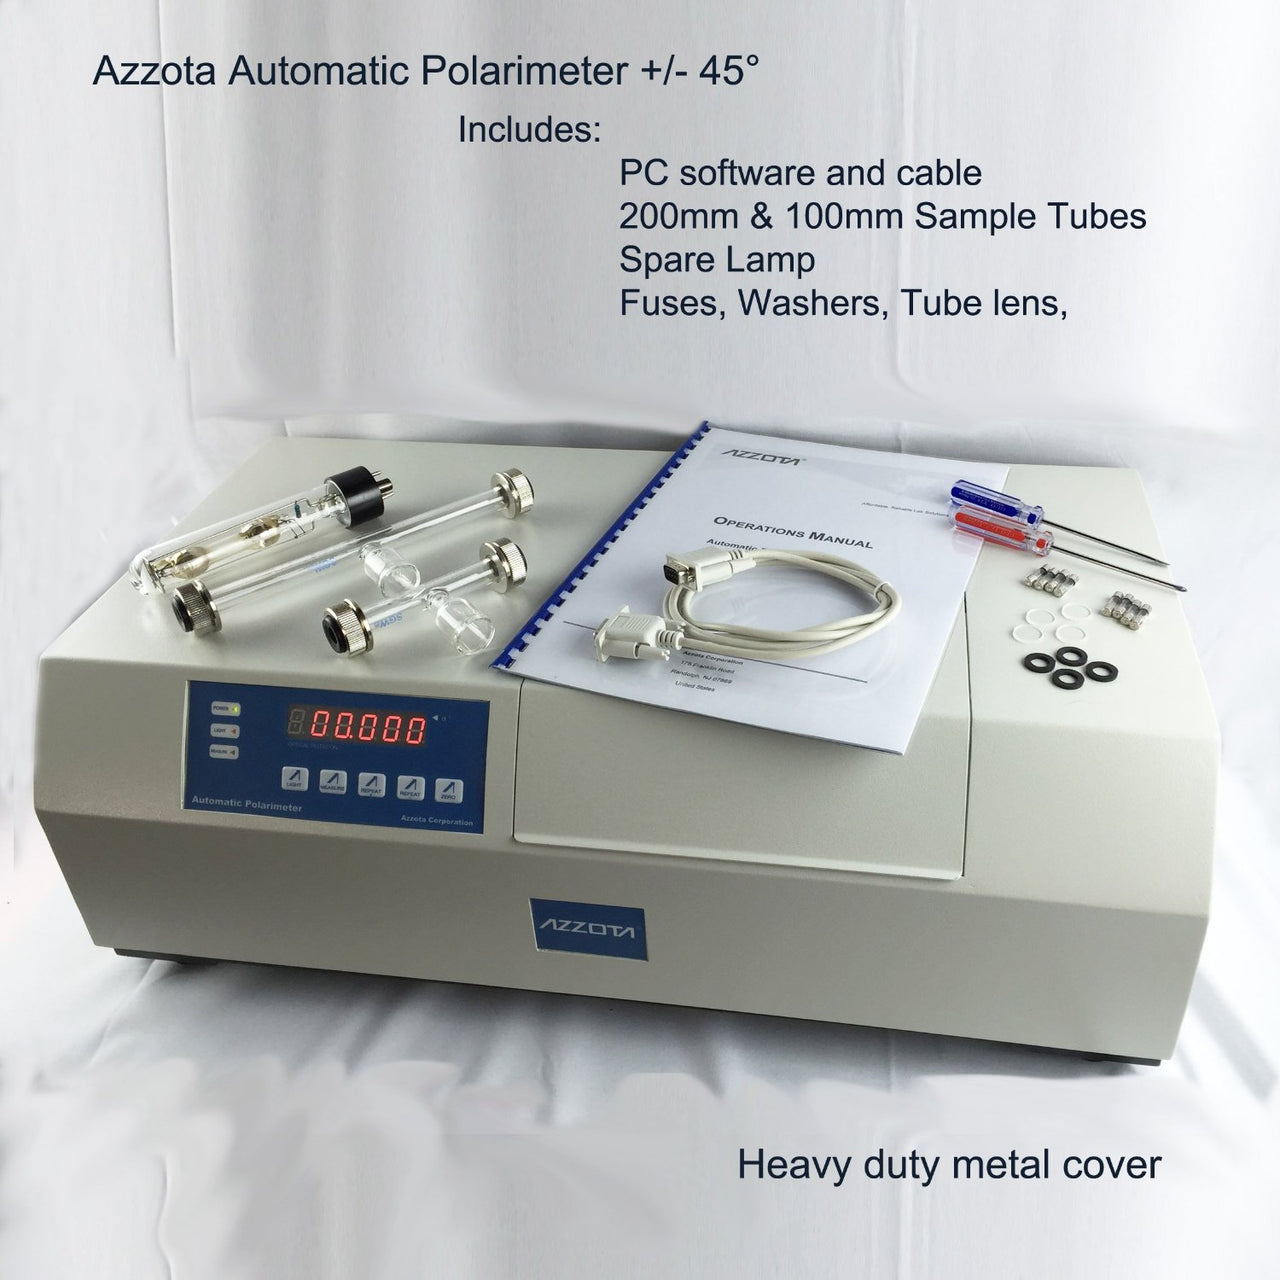 Automatic Polarimeter +/-45' include pc software and cable, 200mm&100mm sample tubes, spare lamp, and fuses, washes, tube lens